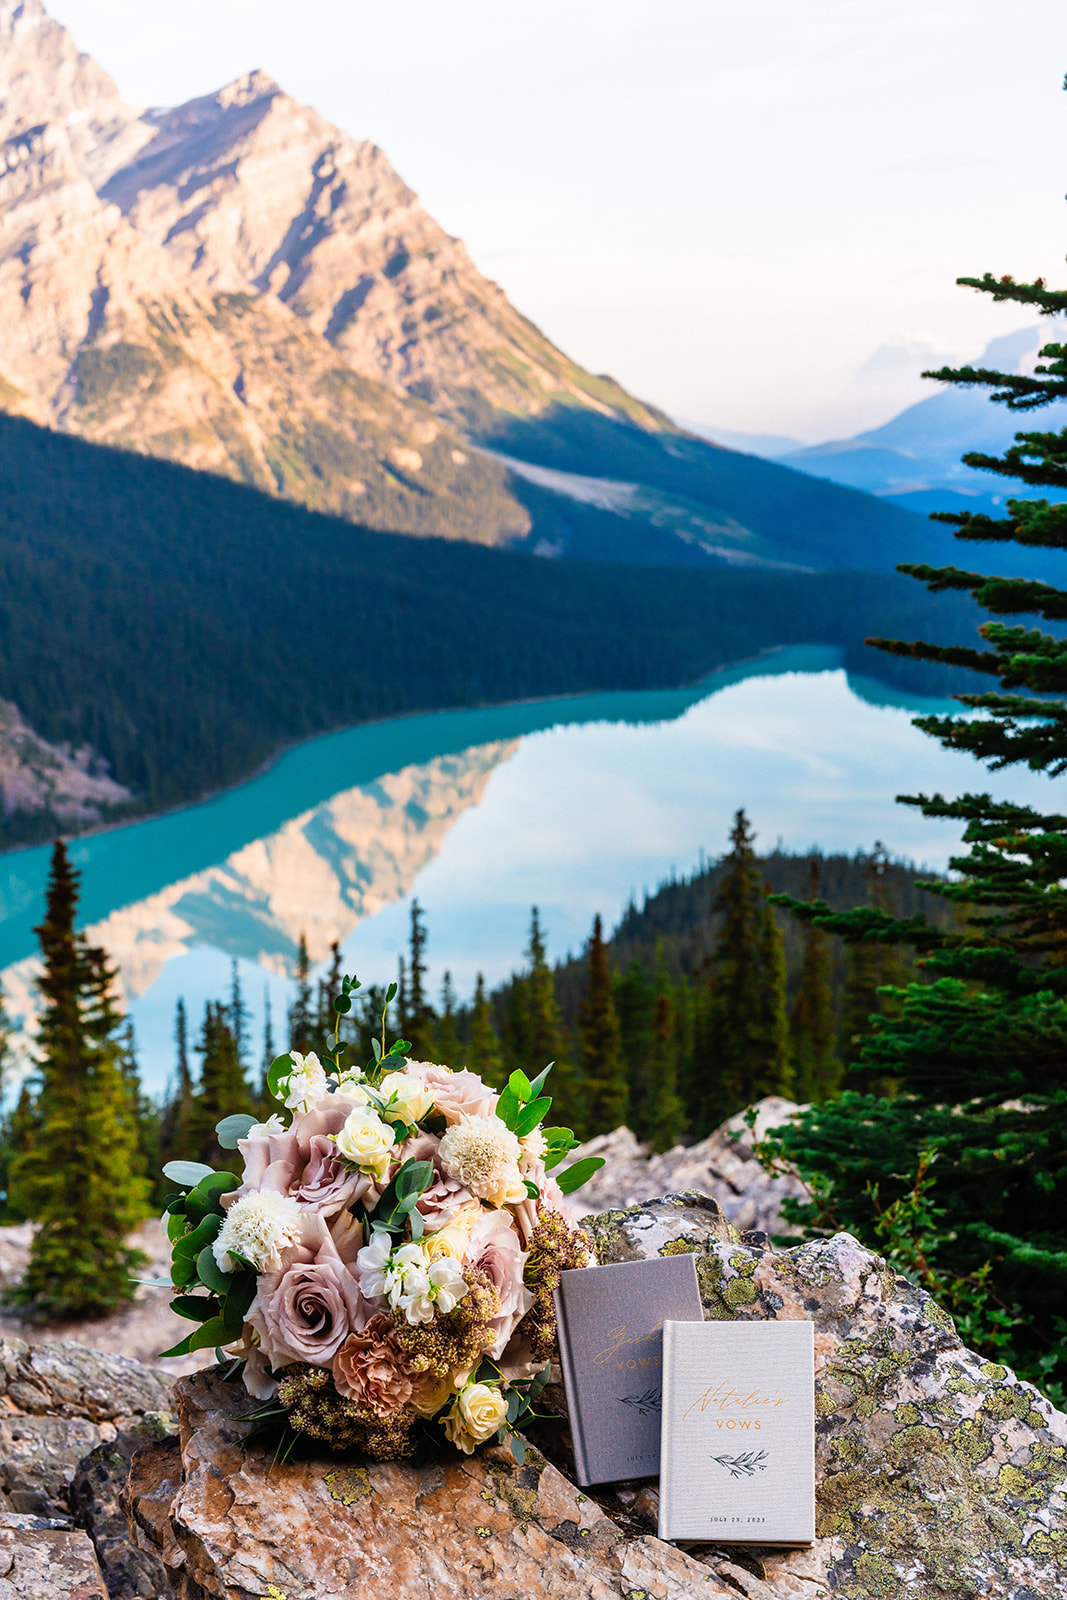 Bride and groom vows and floral bouquet with a view of Banff mountains and lake in the background